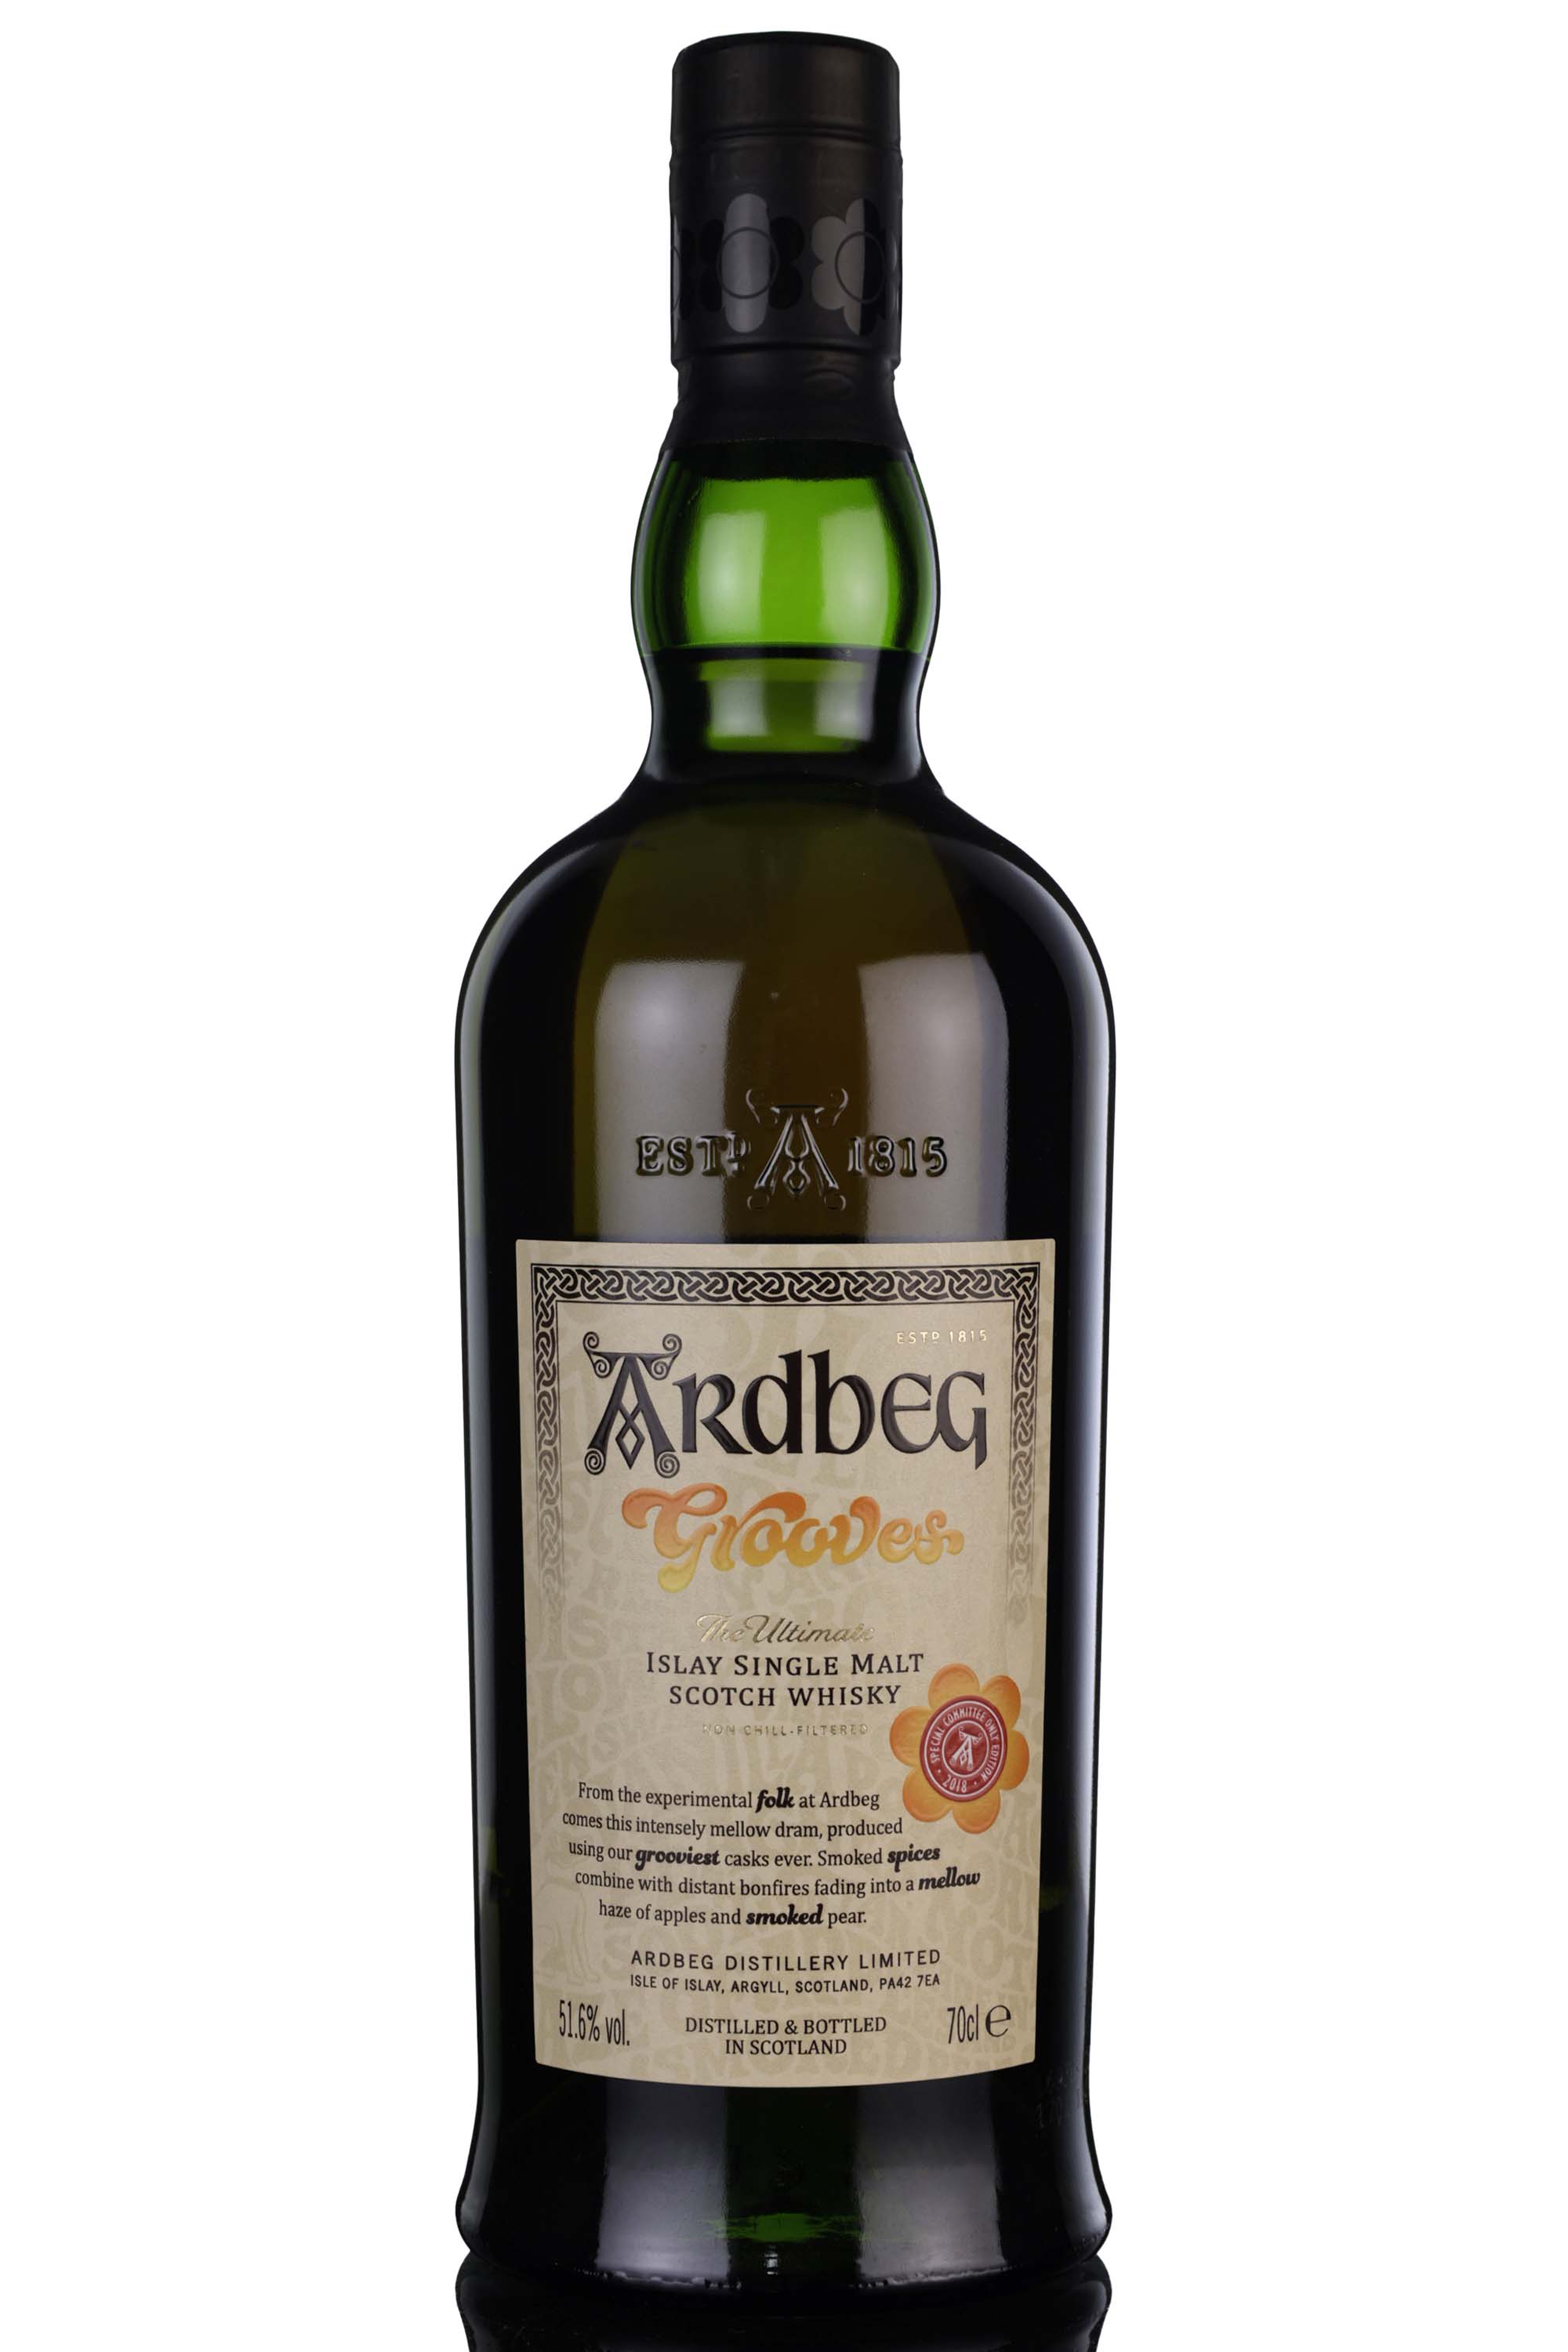 Ardbeg Grooves - Special Committee Only 2018